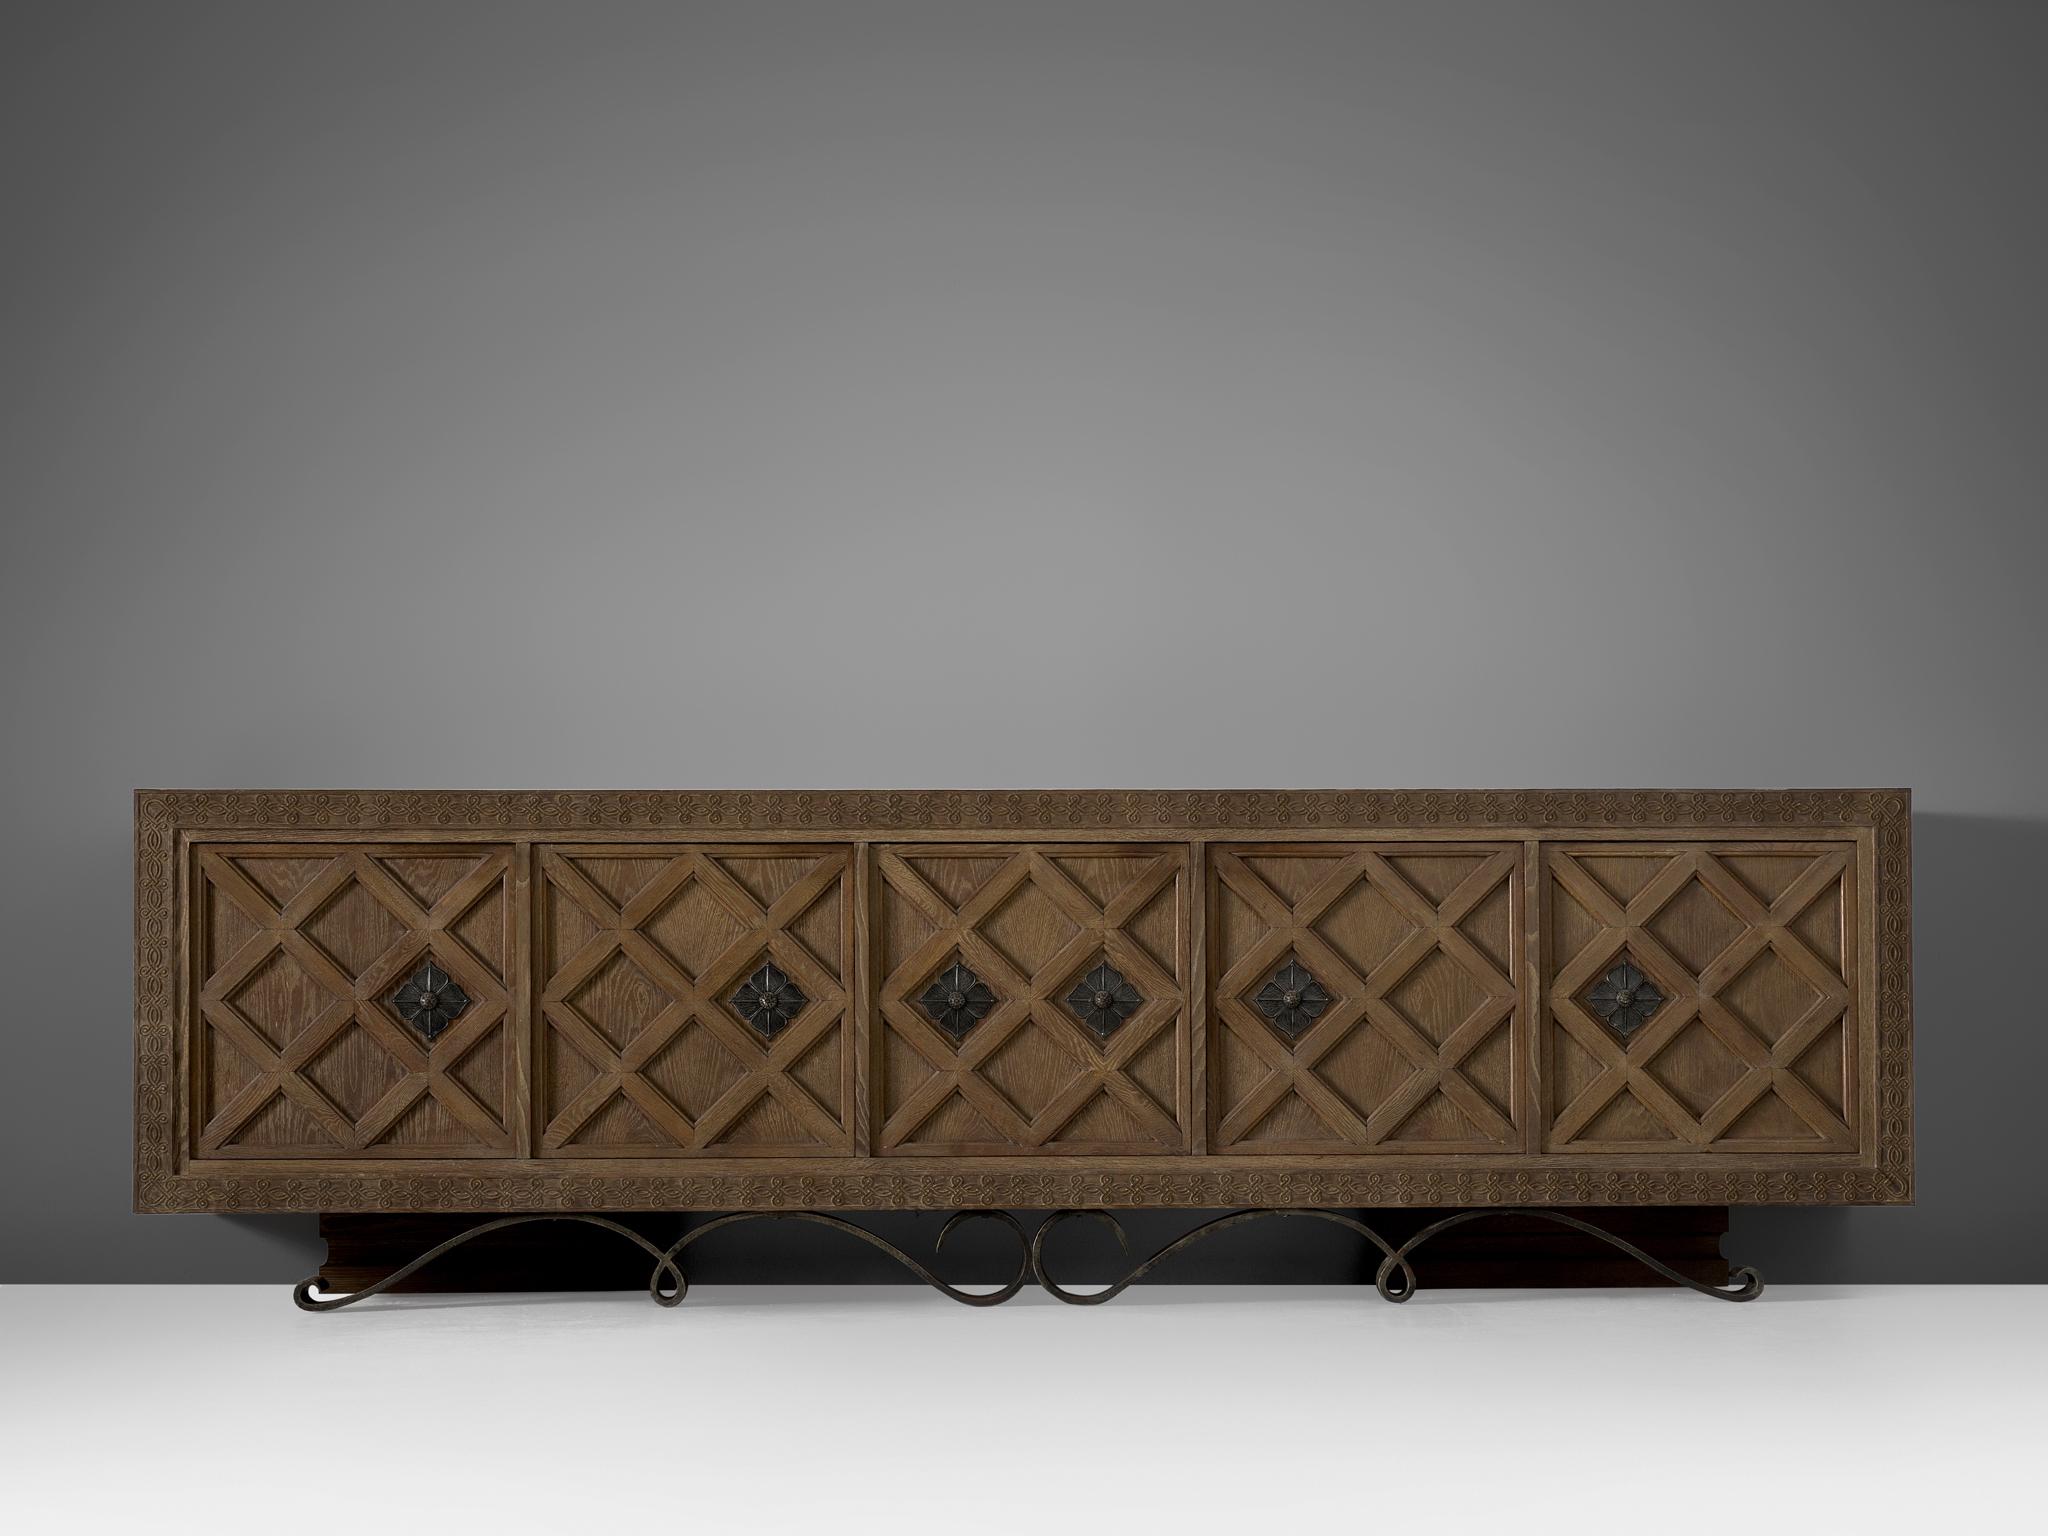 Credenza, in oak and brass, France, 1930s.

This very large credenza with five doors in oak has brass details. All five doors are beautifully designed with wooden graphical patterns. The diagonal lines with added squares and a frame emphasize the